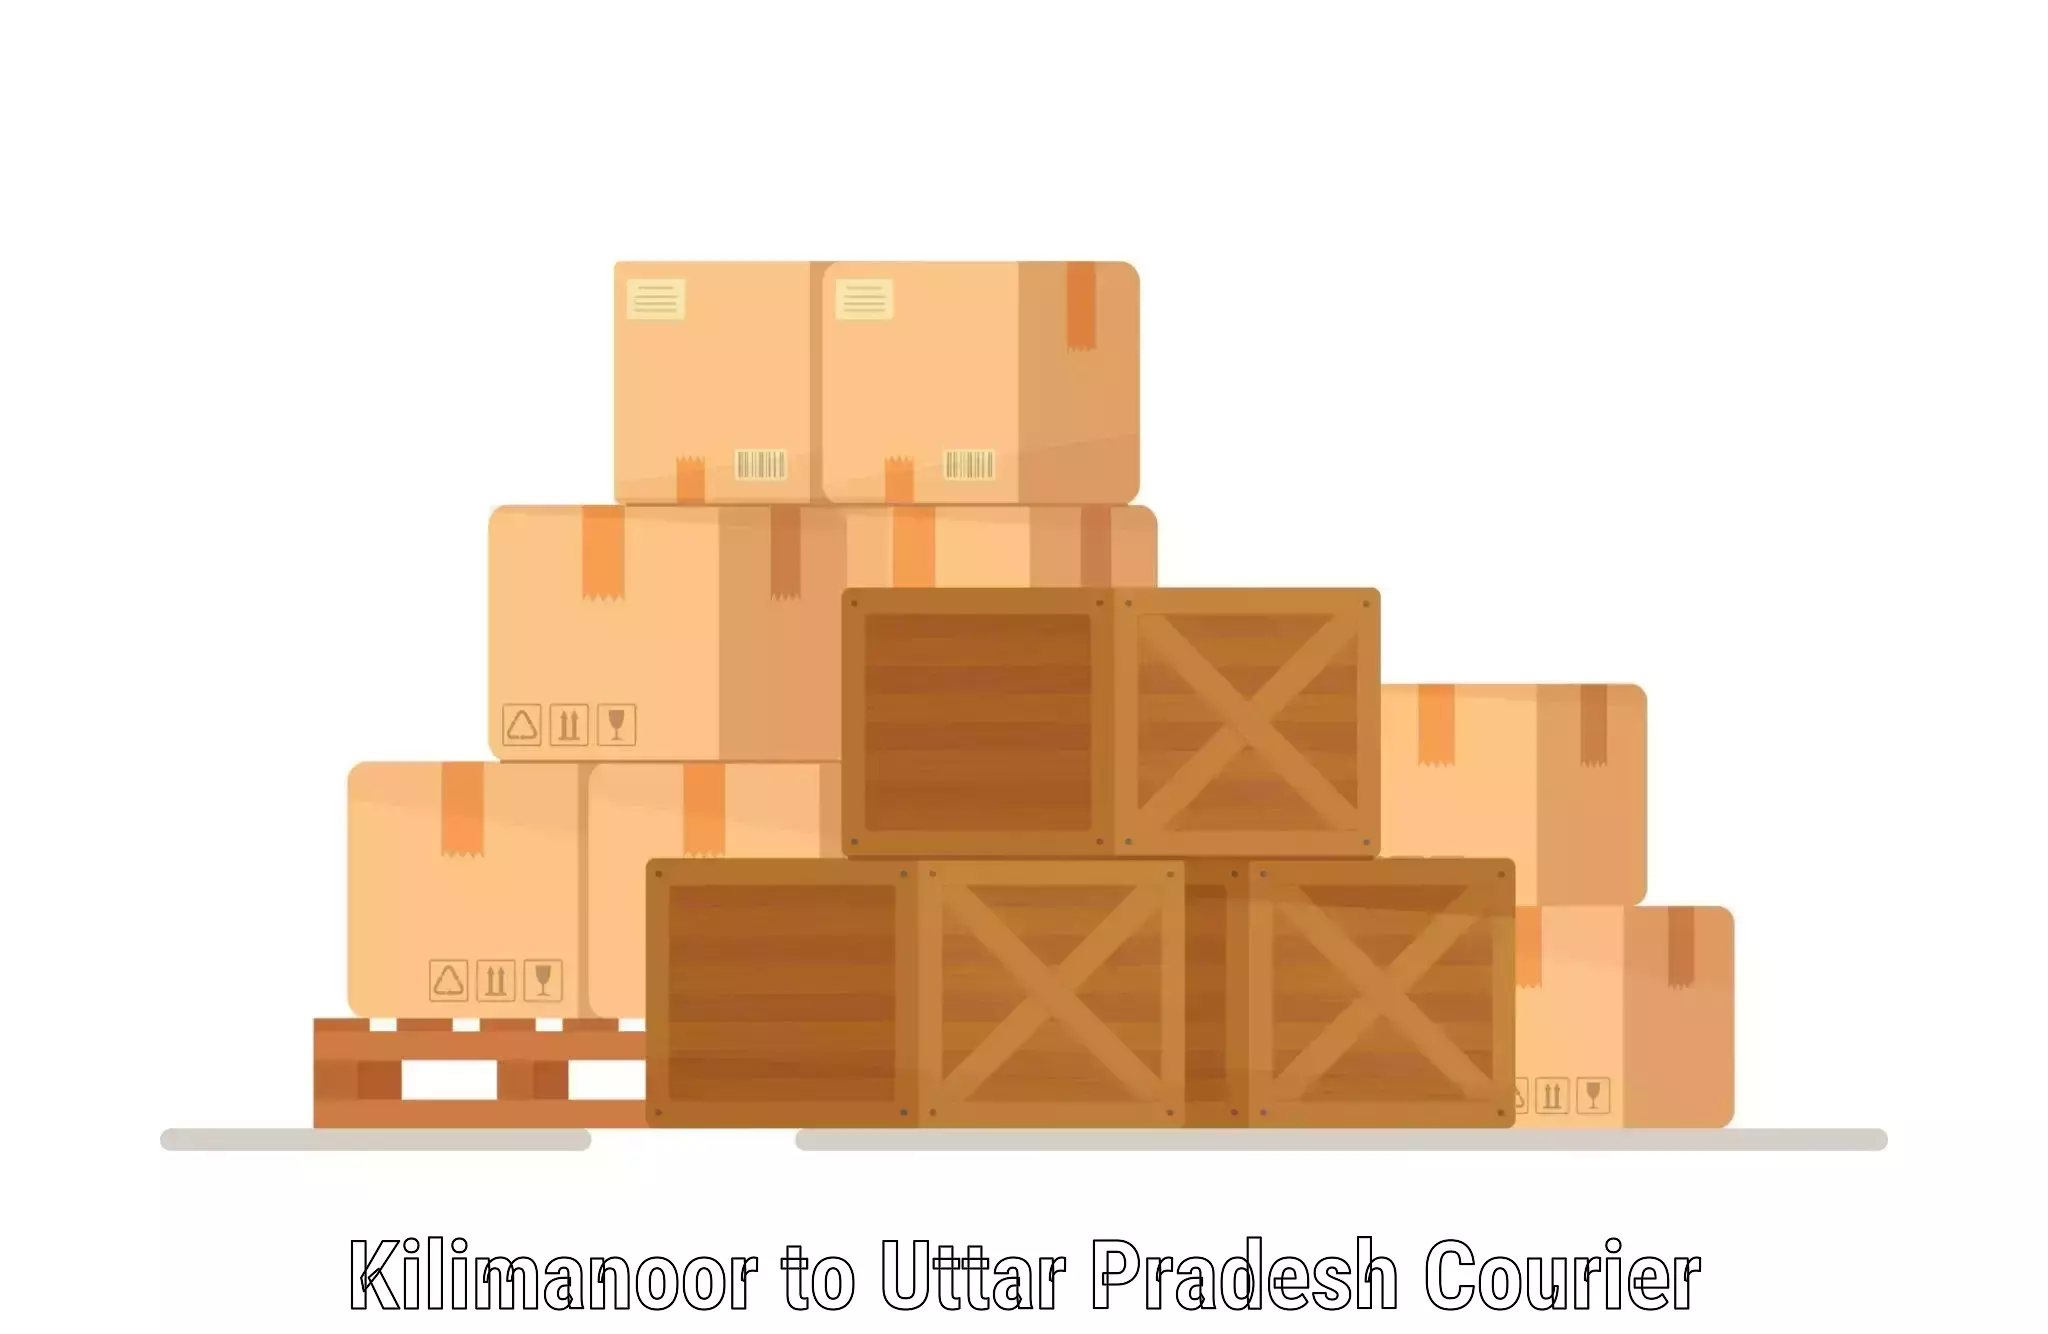 State-of-the-art courier technology Kilimanoor to Raebareli